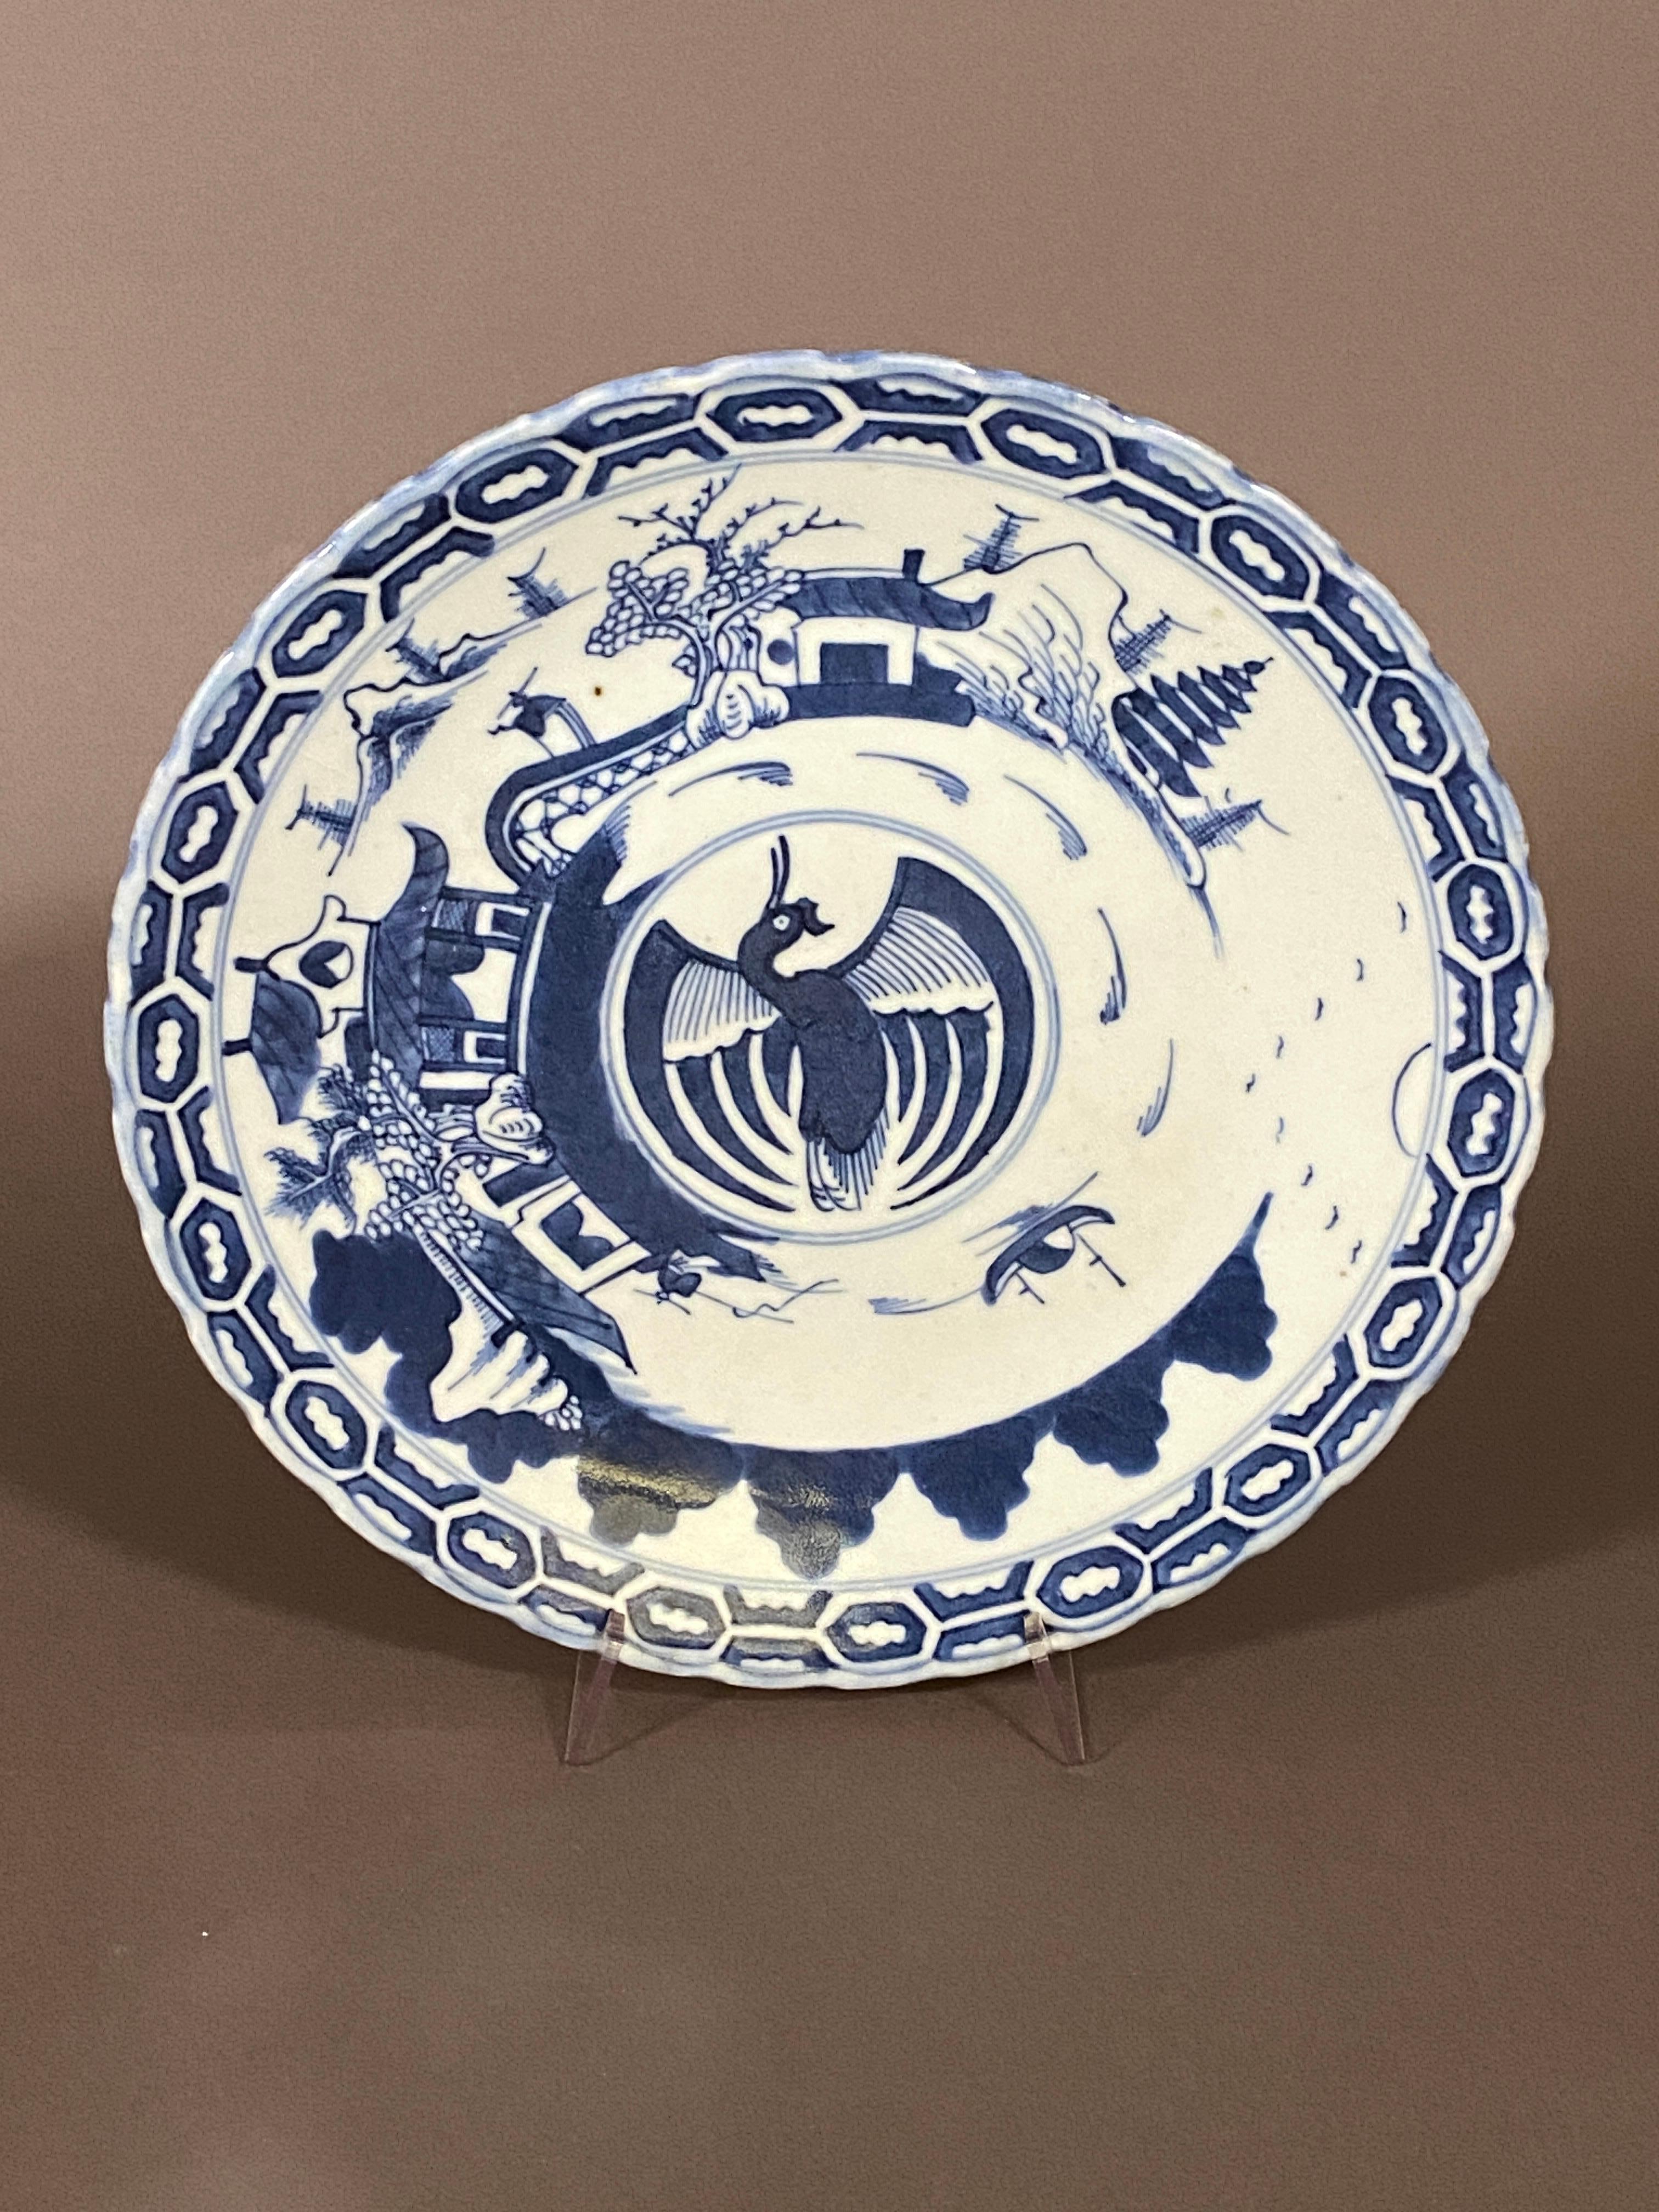 Large 19th century China blue and white porcelain plate with a phenix, pagodas and landscape with a mark and a wax stamp on the reverse.